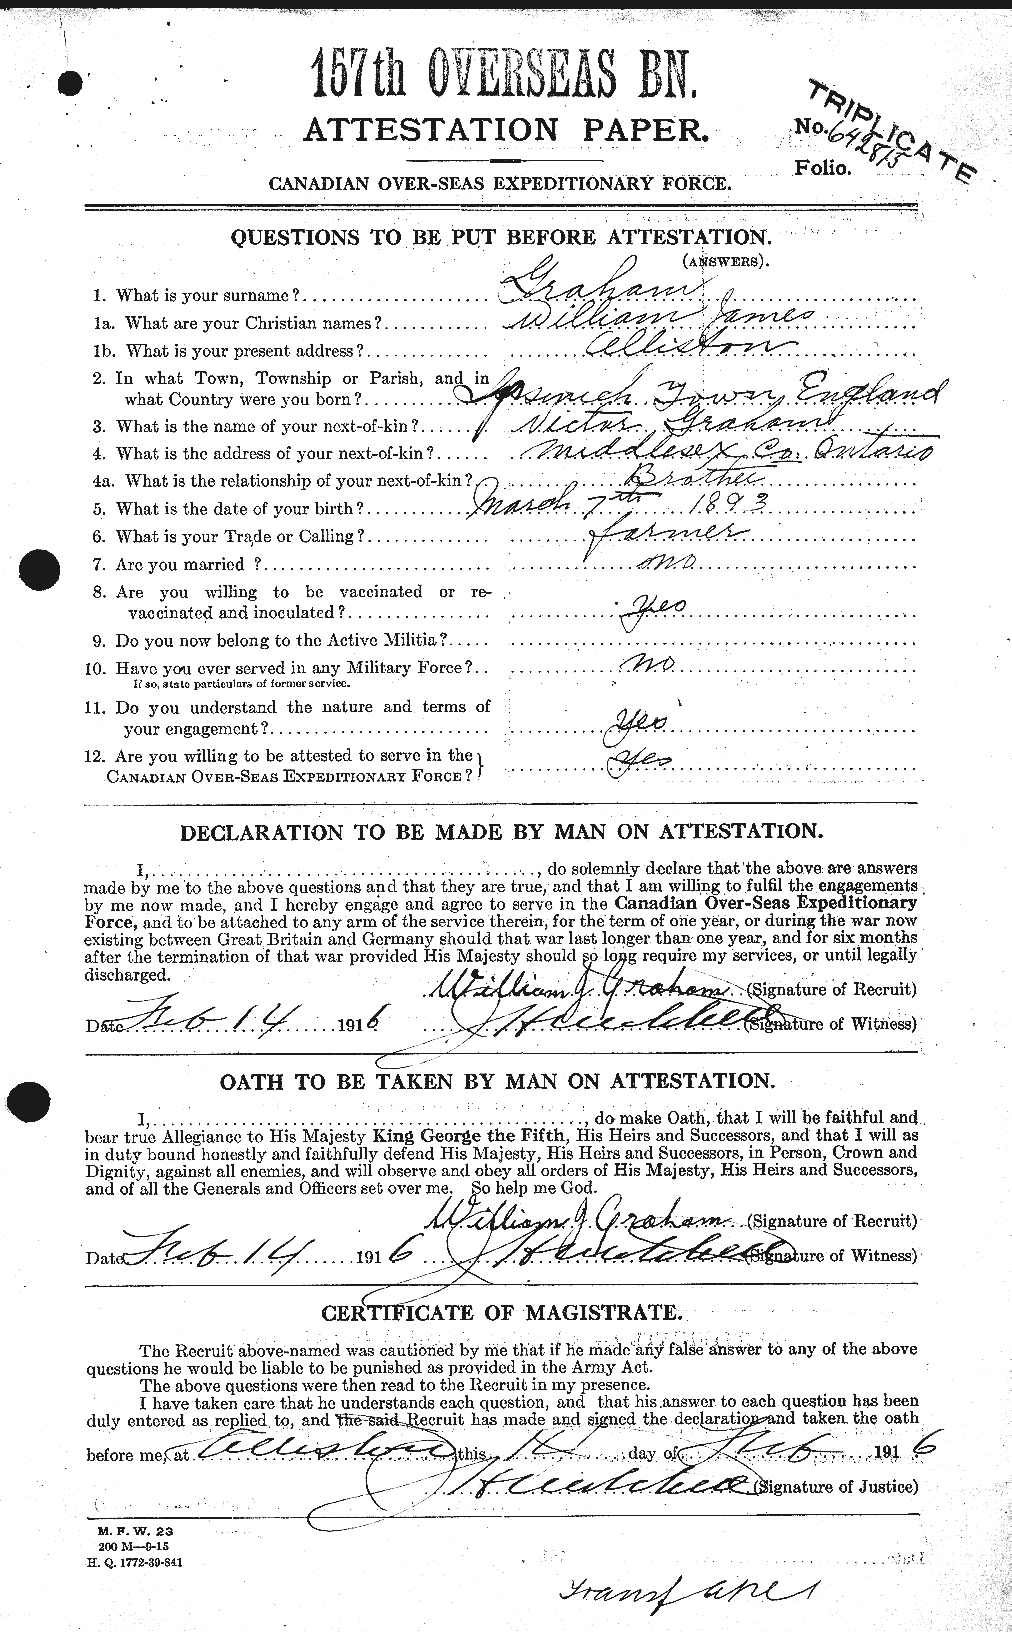 Personnel Records of the First World War - CEF 358010a